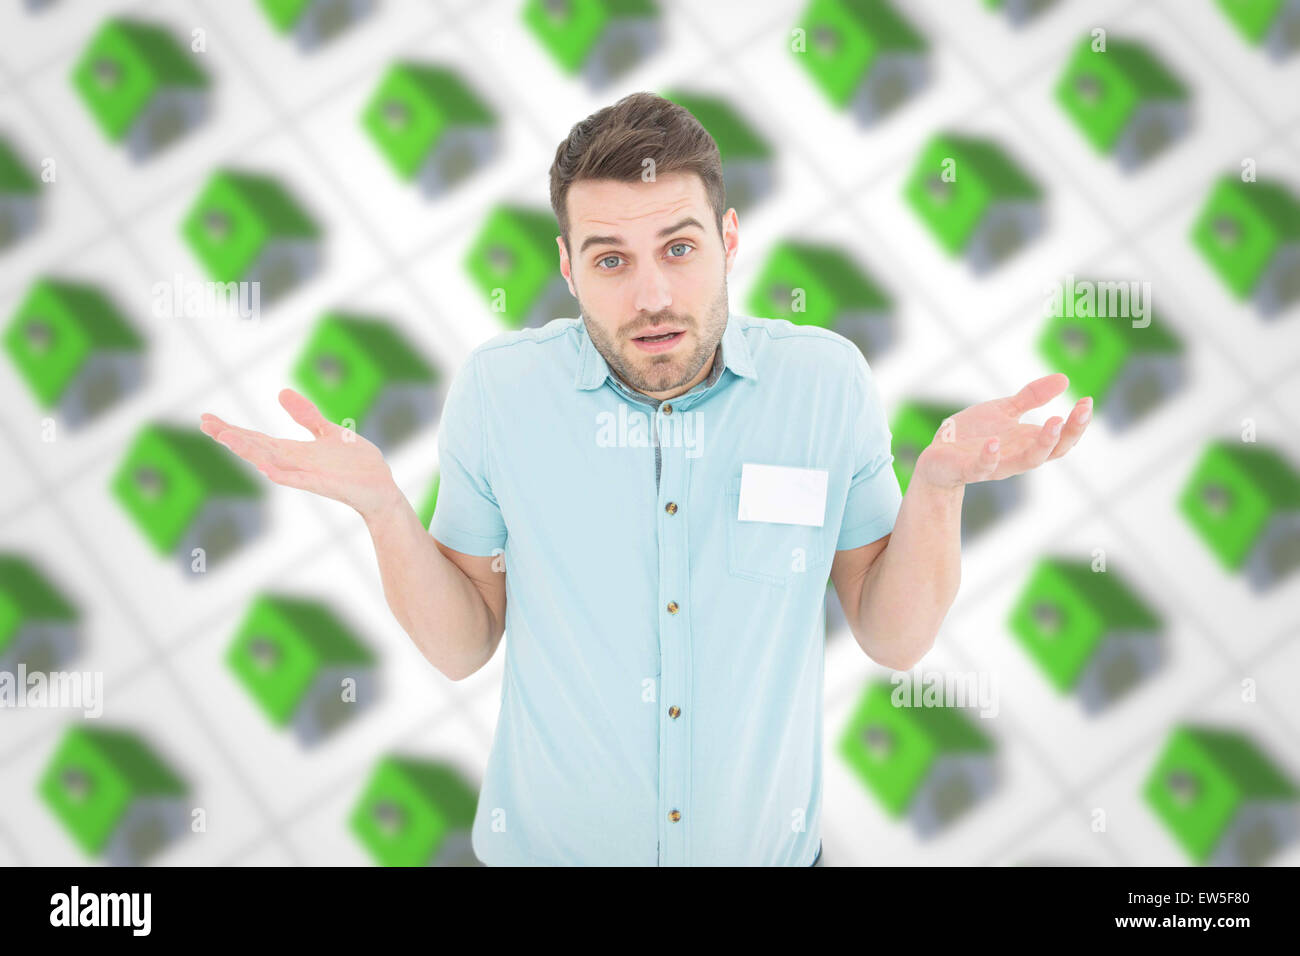 Composite image of delivery man giving i dont know gesture Stock Photo